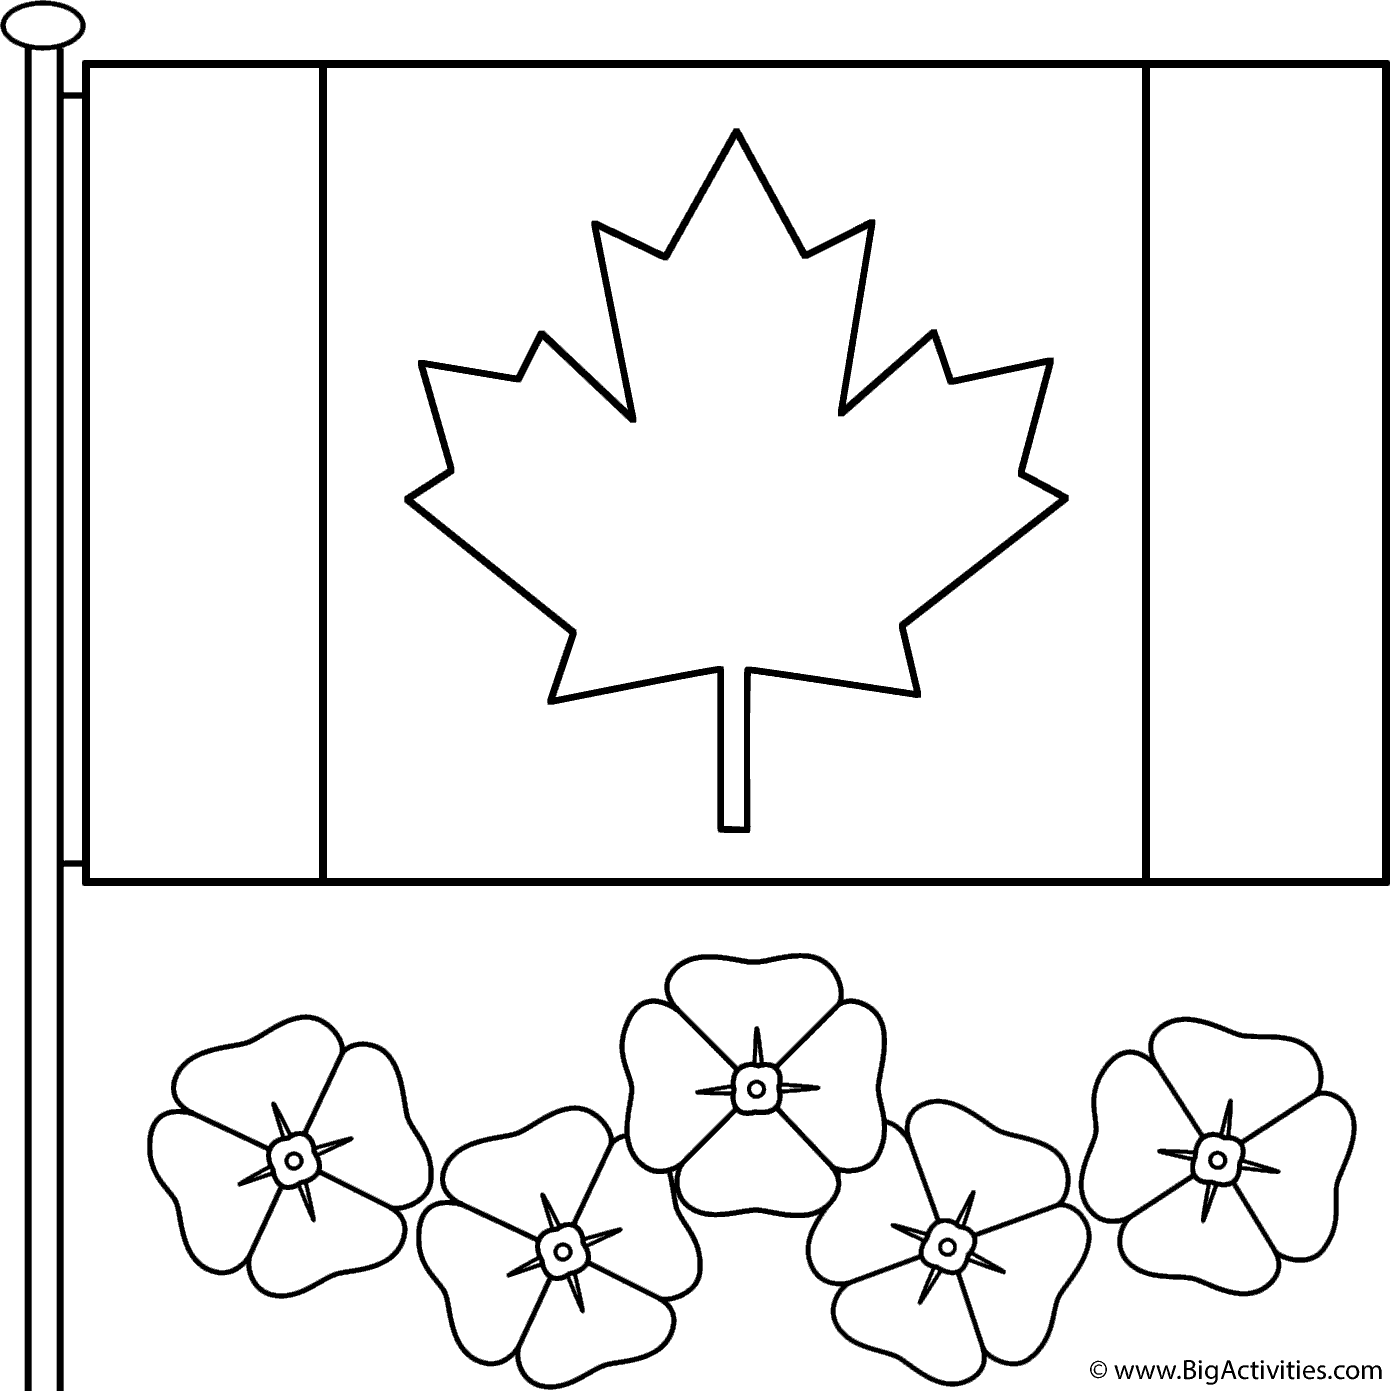 Canadian Flag with poppies - Coloring Page (Remembrance Day)